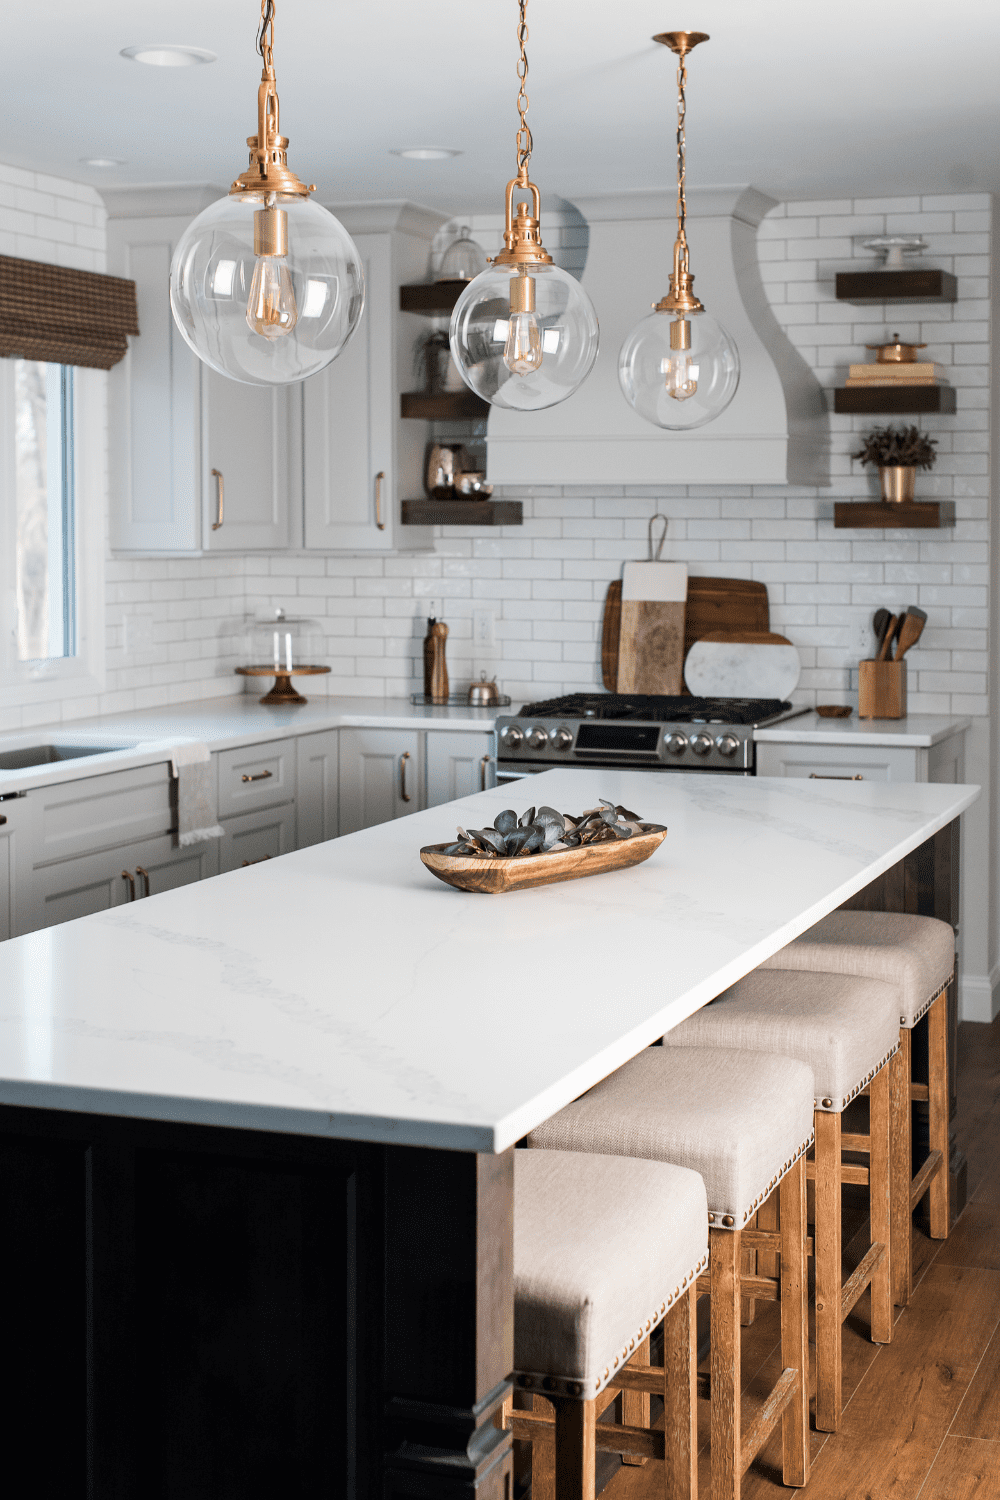 Nicholas Design Build | A neutral kitchen with a large island and stools.